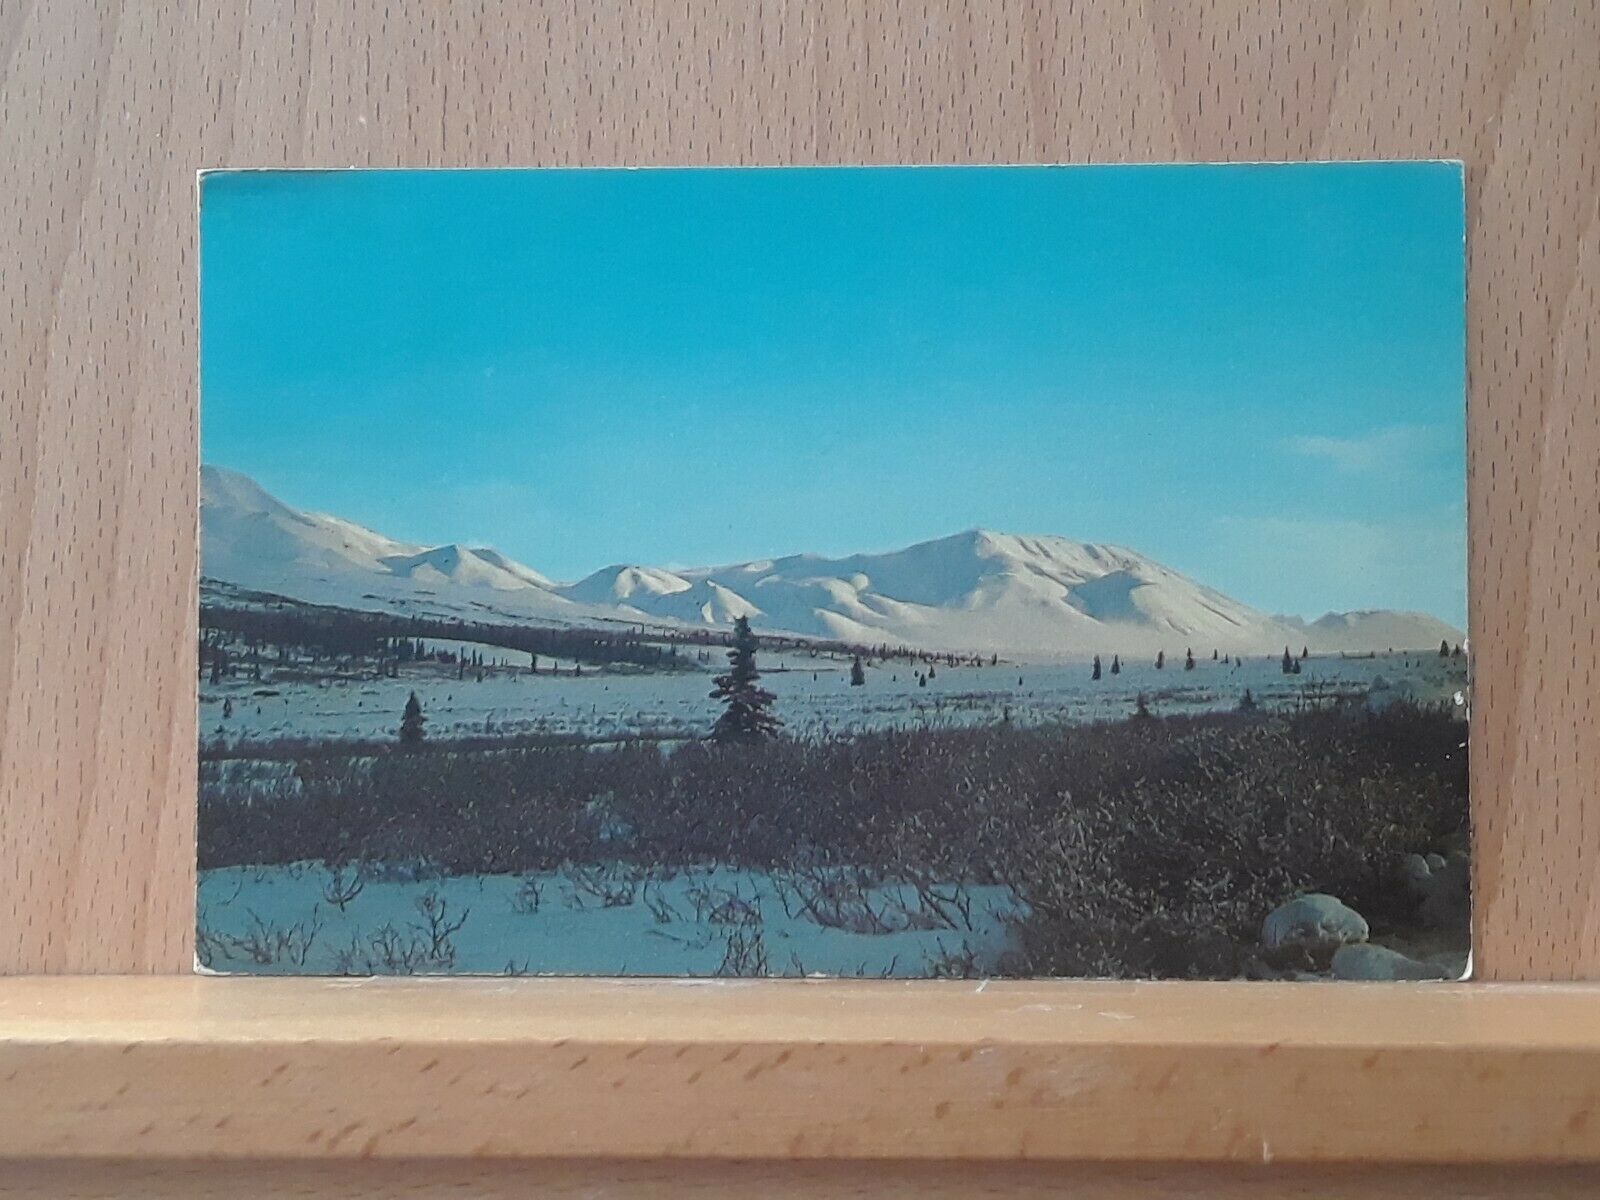 Post Card View Of Mt Mckinley (now Denali) In Denali National Park